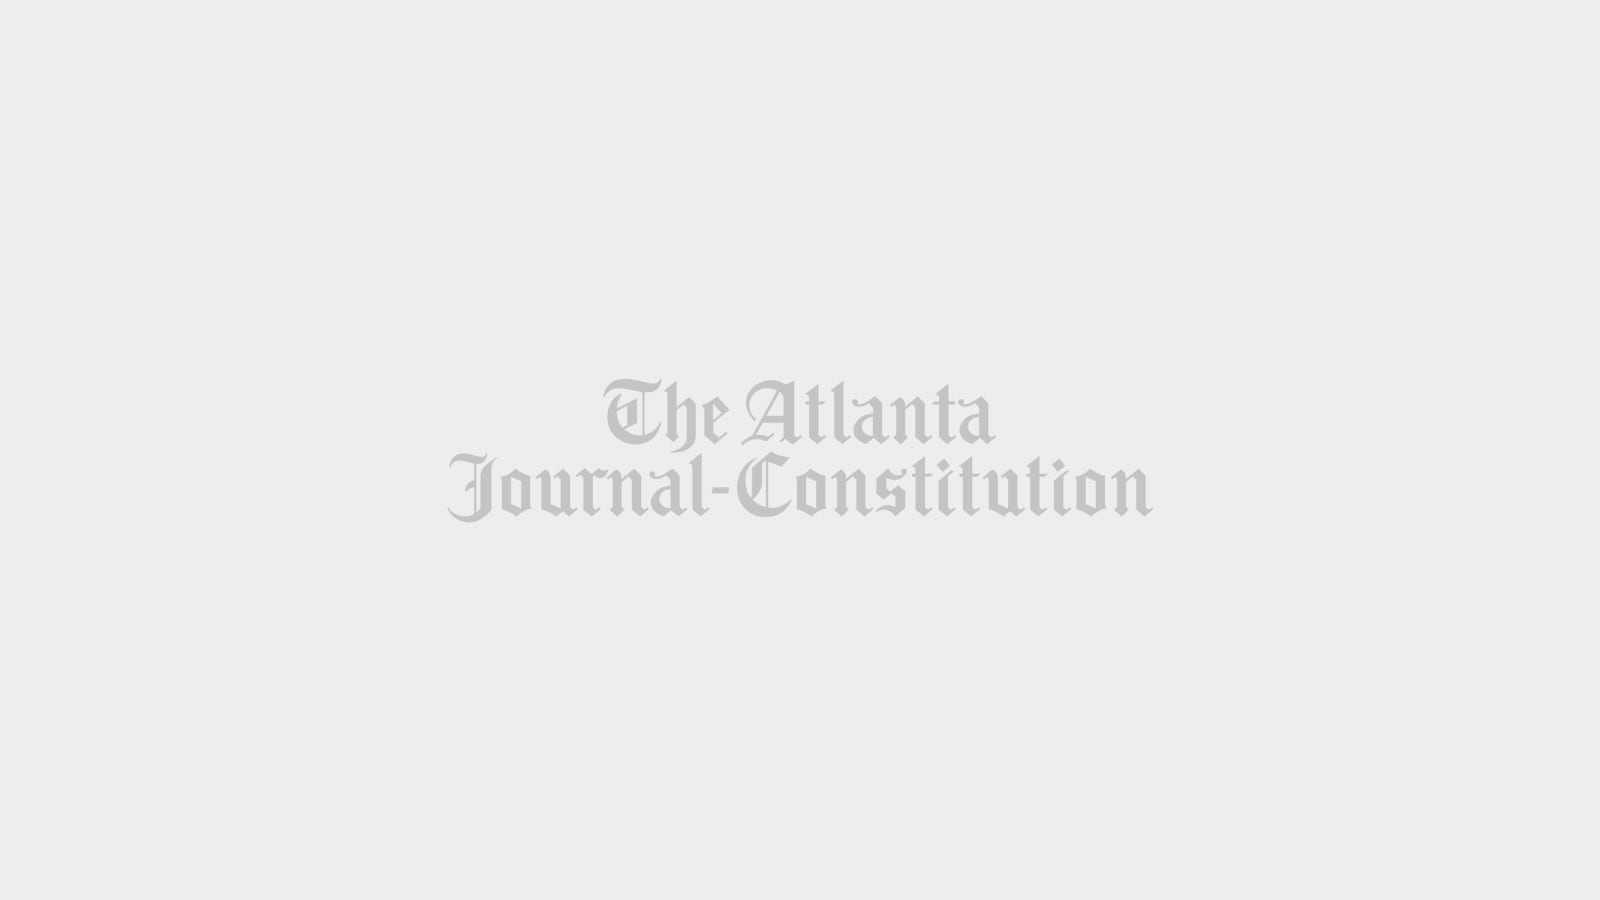 Billy Jones, a deputy with the Glasscock County Sheriff’s Office for 22 years, said he became a peer counselor to first responders because it was something he wanted access to for himself. Ben Gray for the Atlanta Journal-Constitution